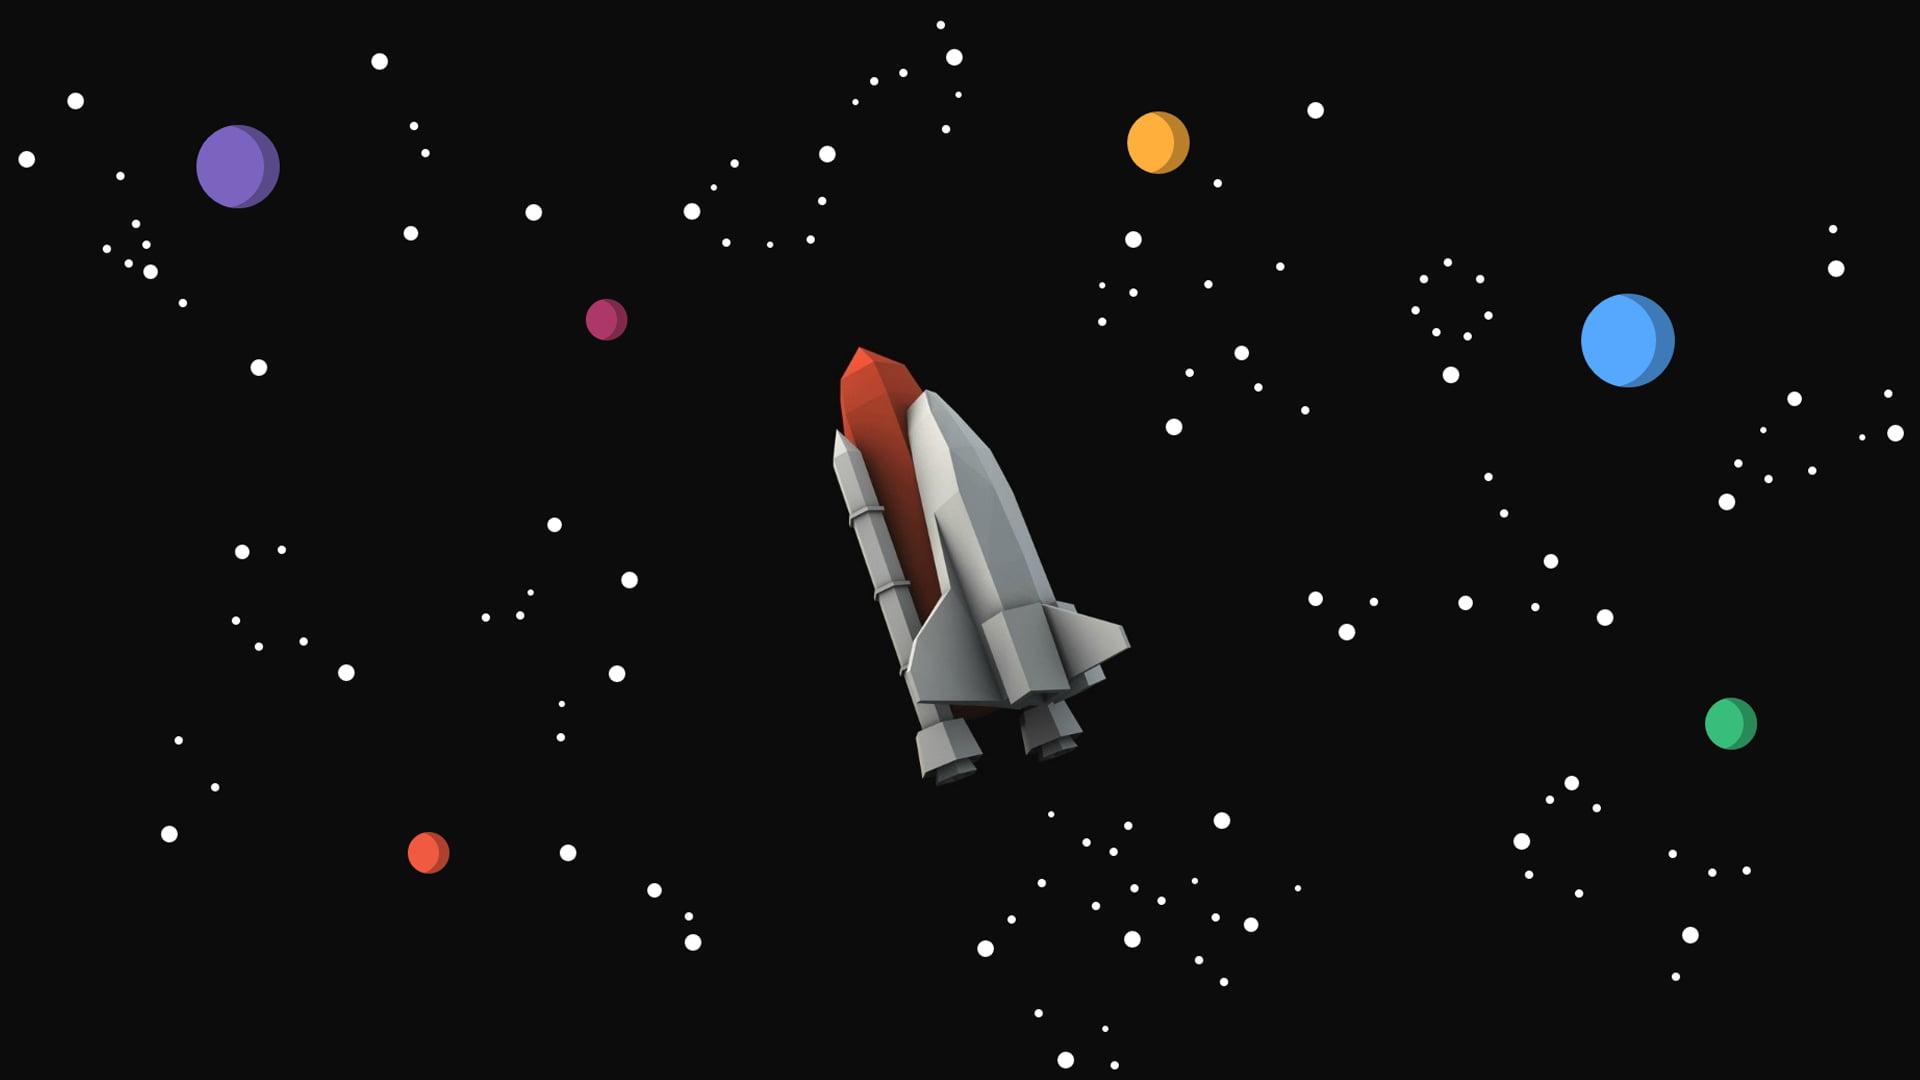 Gray and red spacecraft illustration, space, spaceship, stars